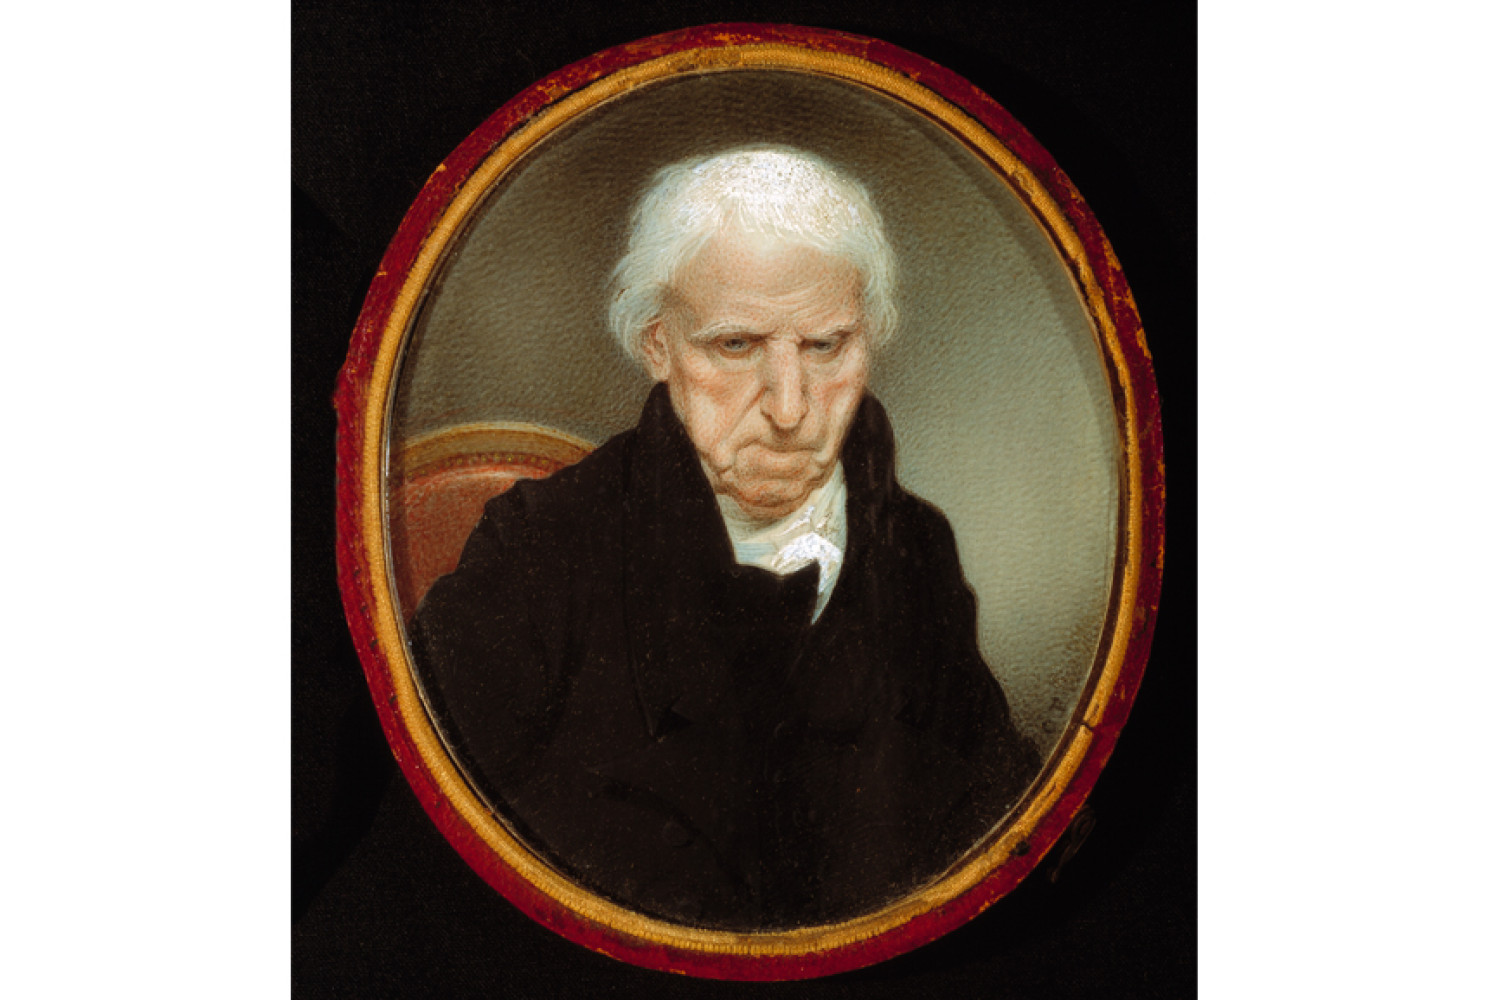 H. F. Plowden Weston (1738-1827), by Charles Fraser (American, 1782-1860); watercolor on ivory; 3 7/8 x 3 1/4 inches; Museum purchase with funds provided by the Eliza Huger Kammerer Fund in memory of Helen Gardner McCormack; 1974.004